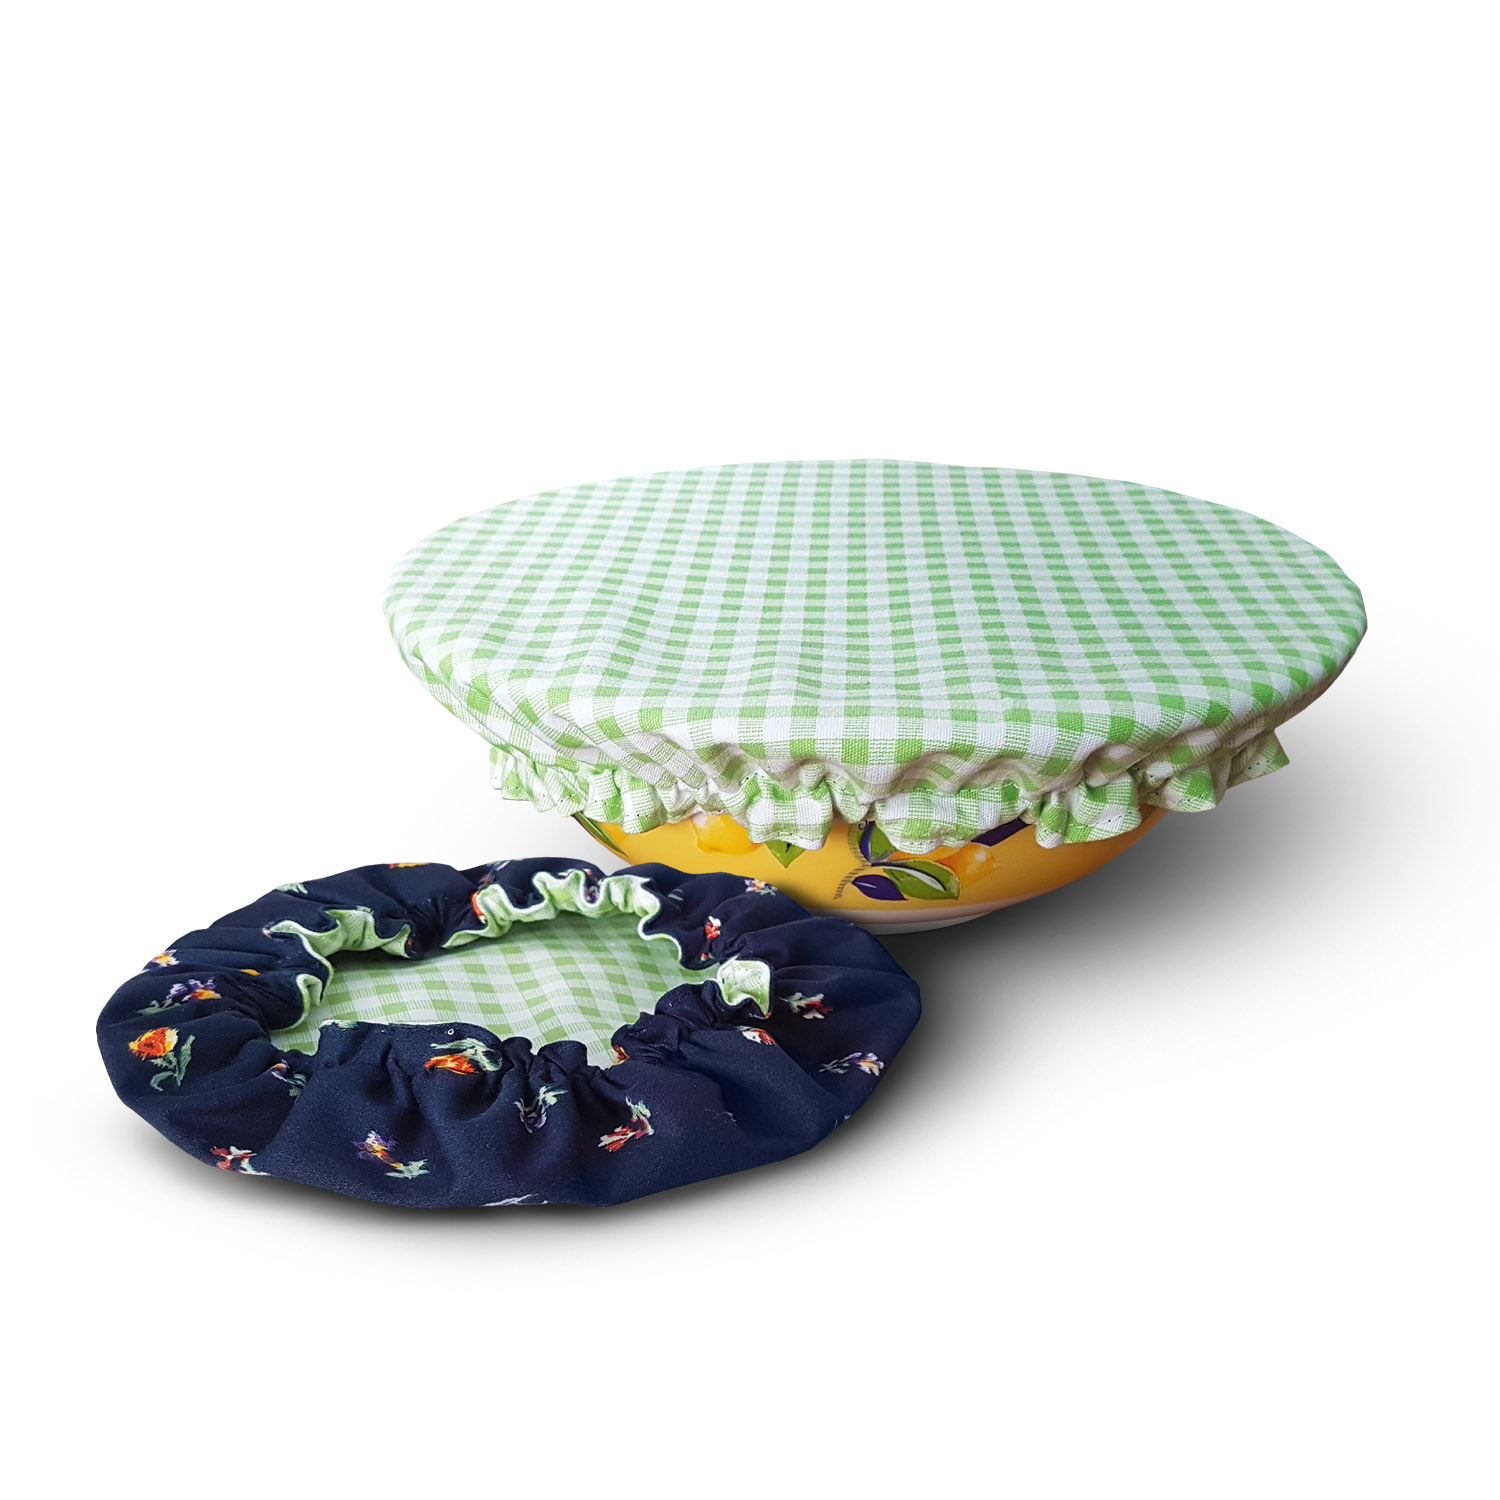 COTTON FABRIC DISH COVERS - SET OF 2